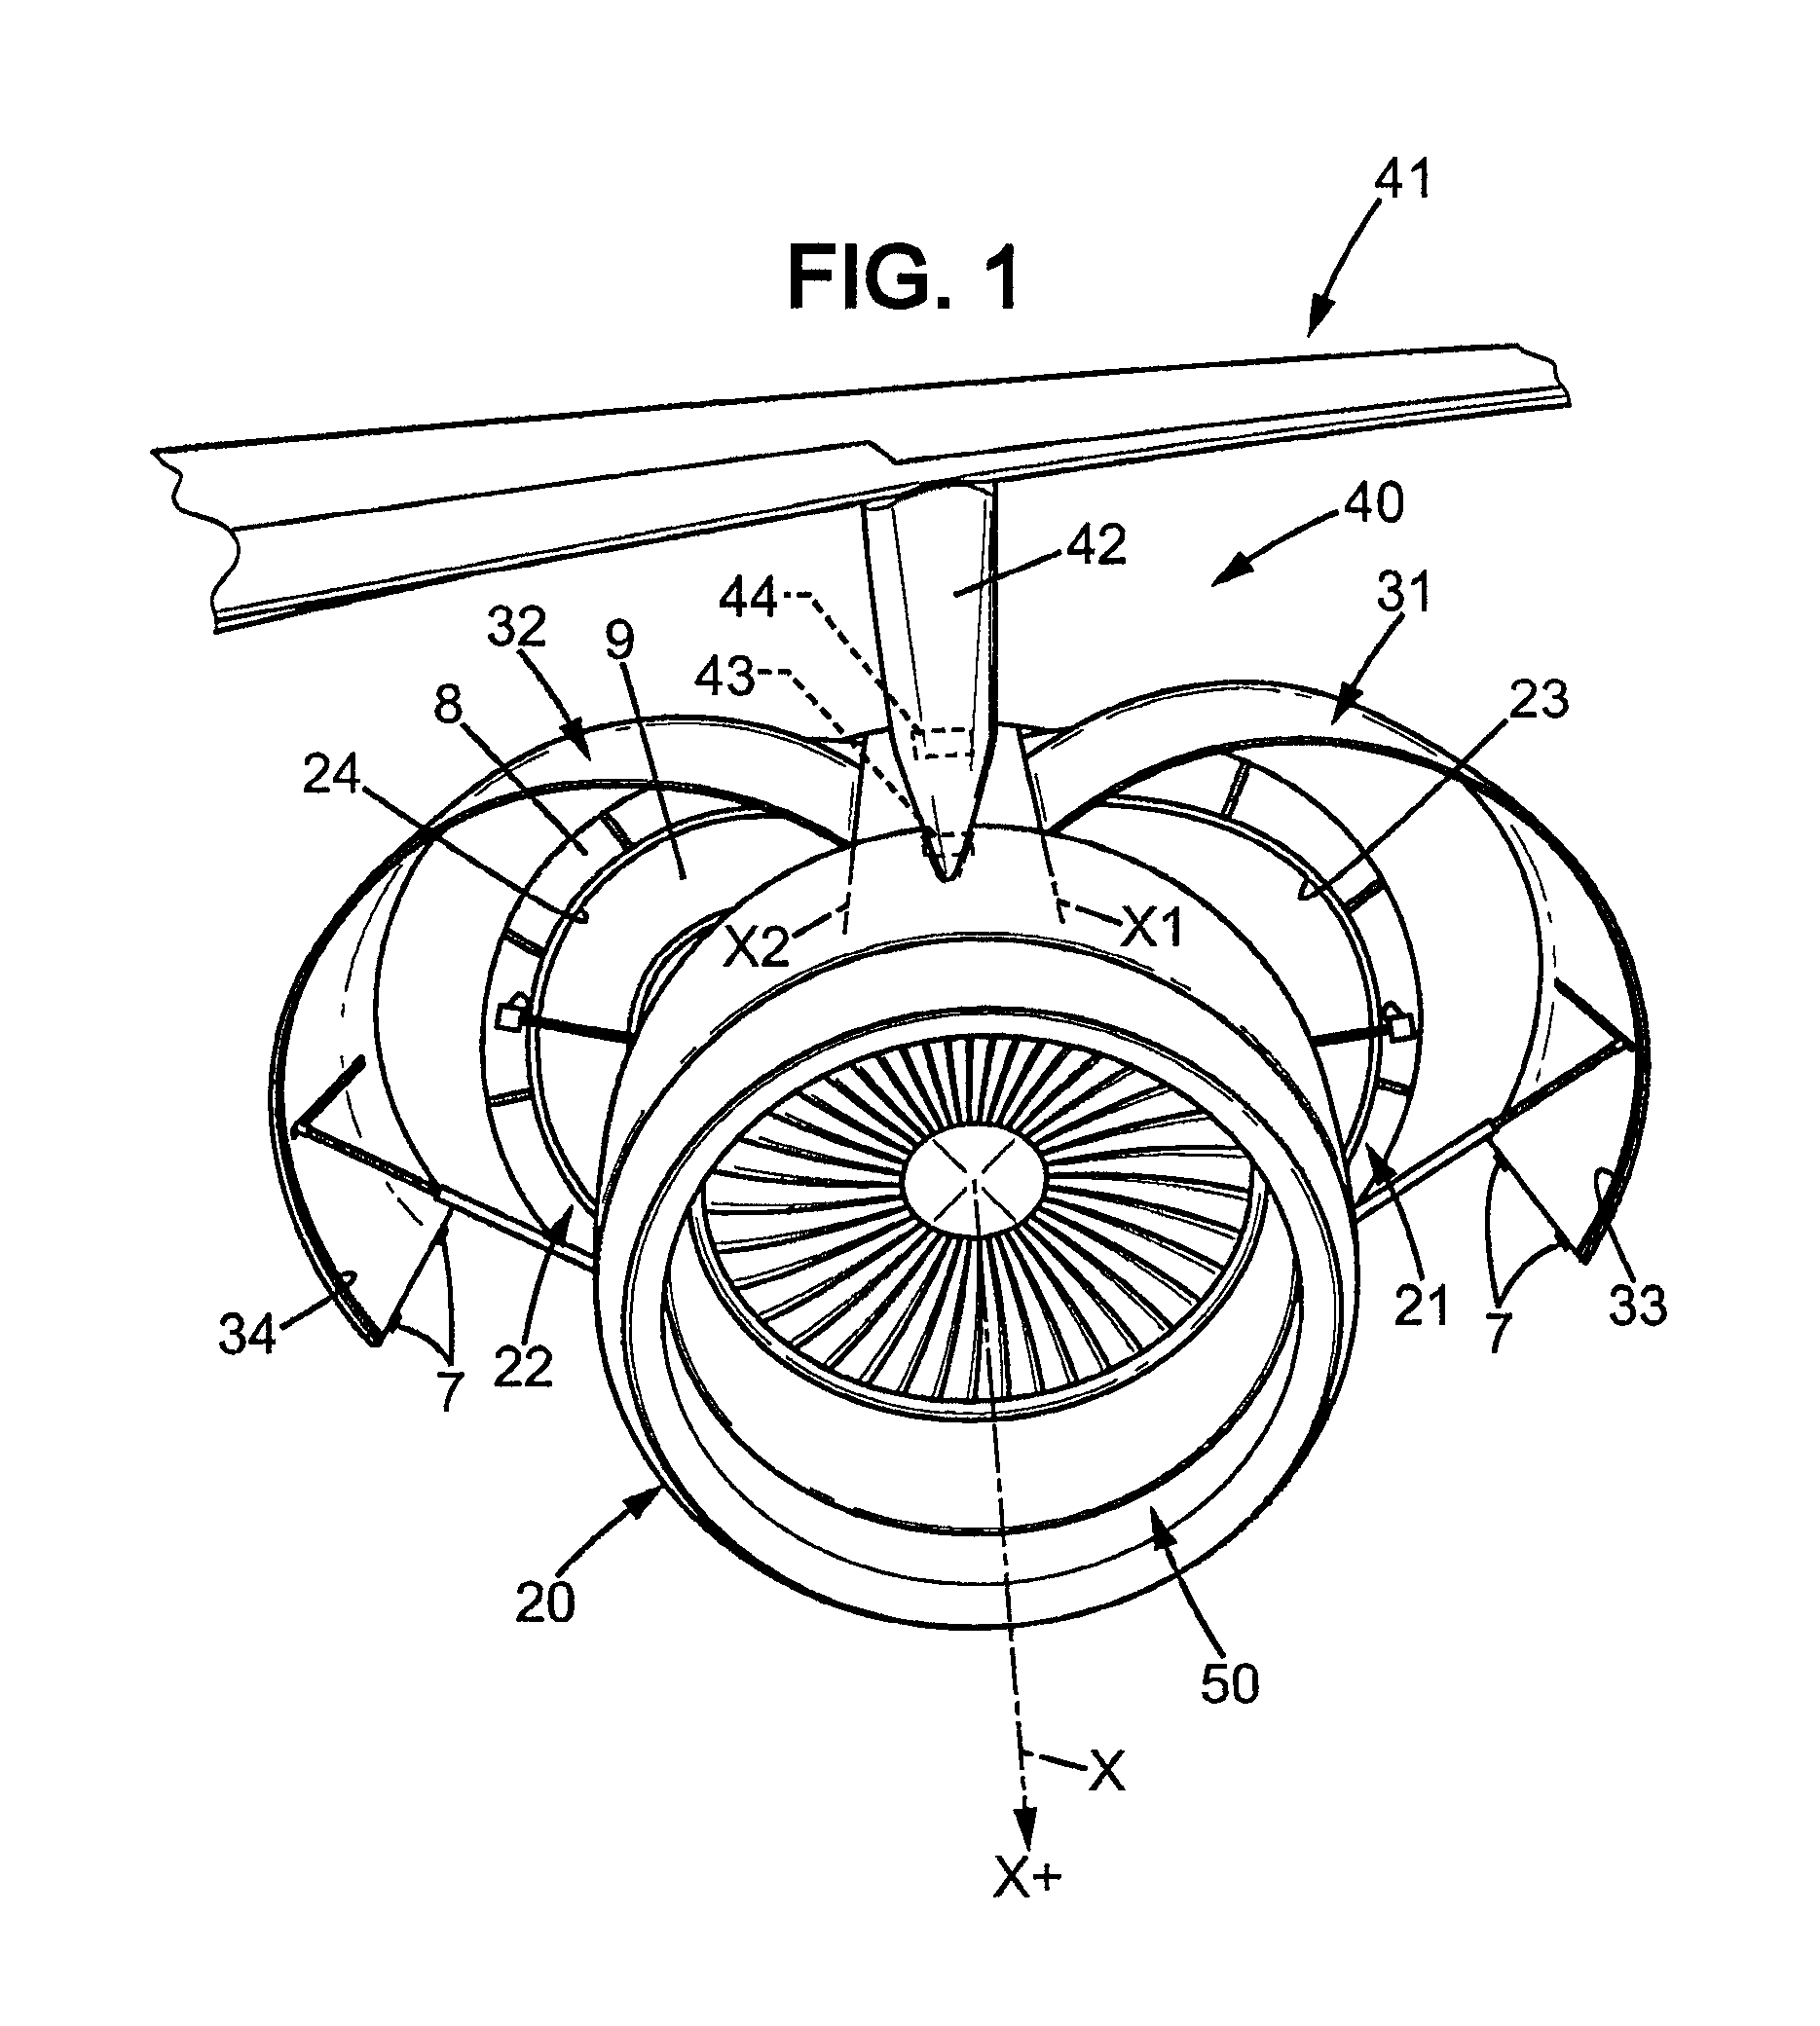 Substitution device for aircraft engine